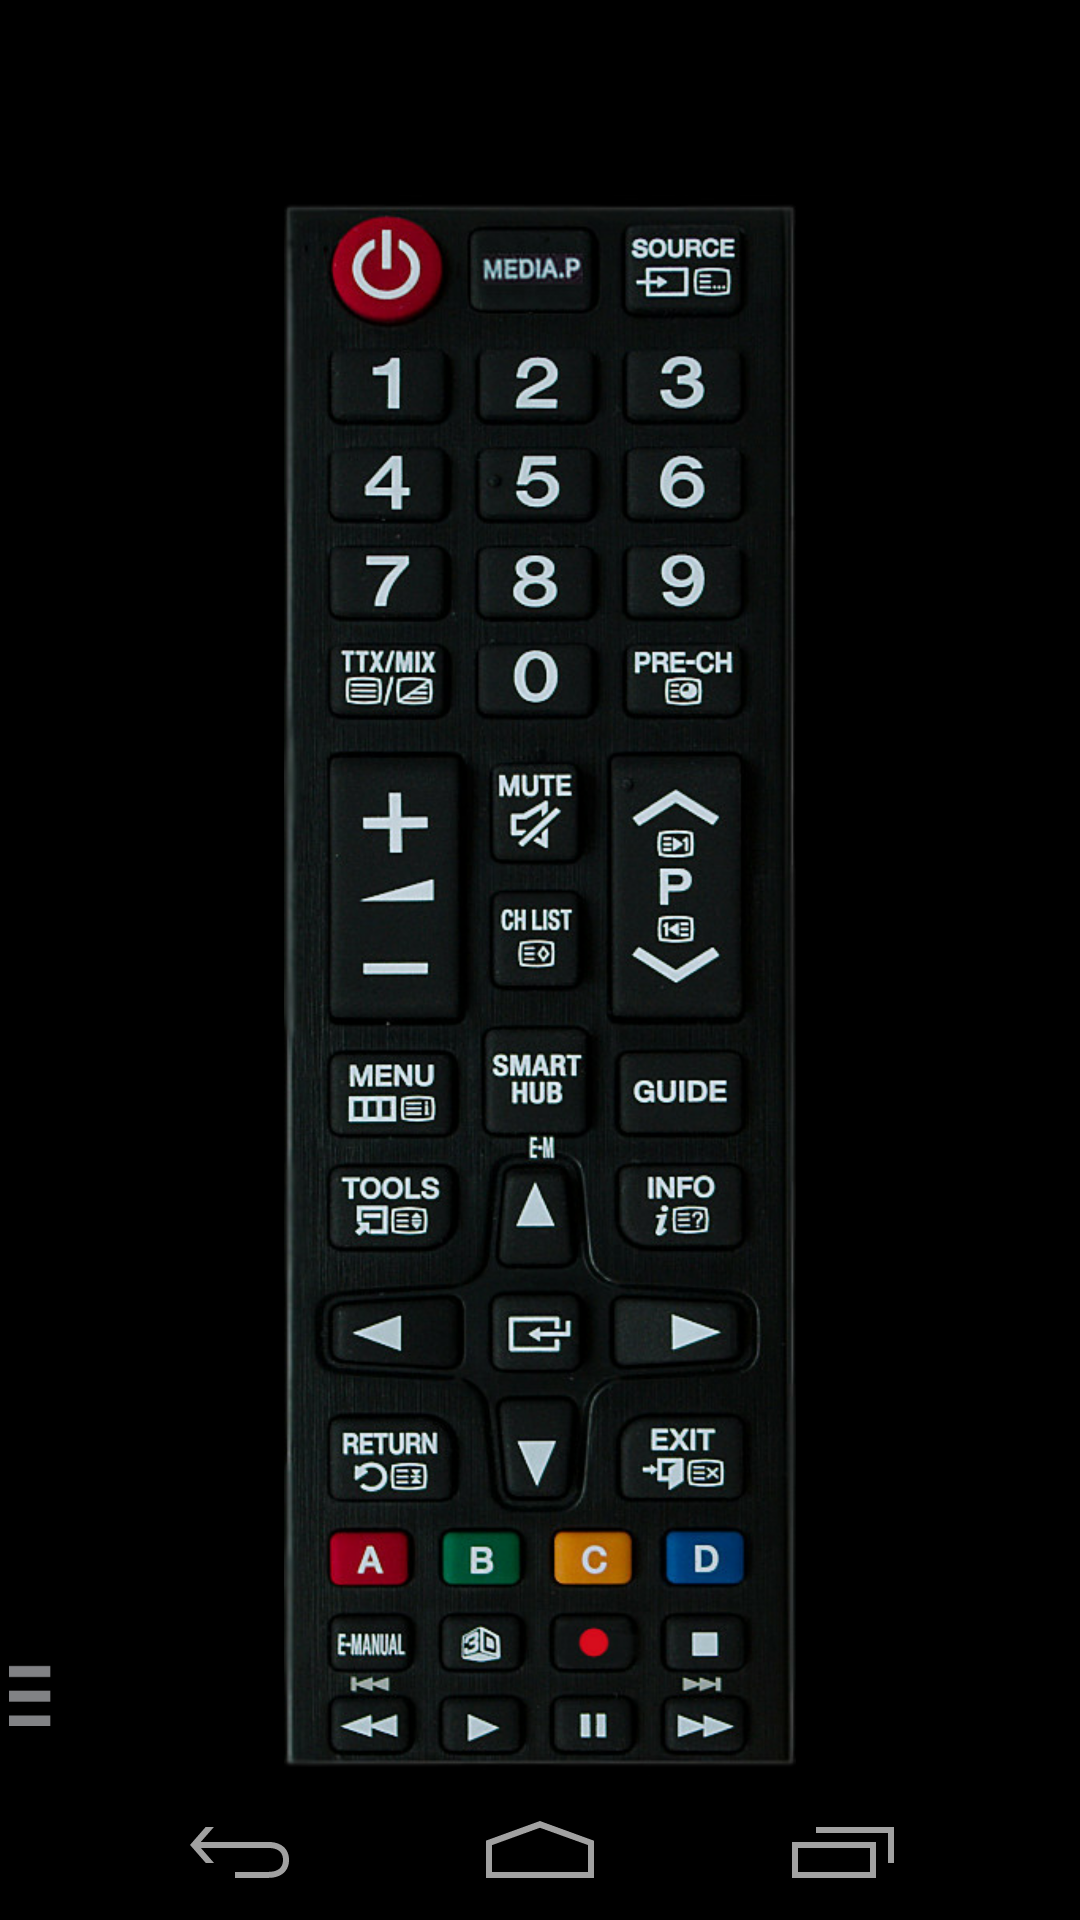 Android application TV (Samsung) Remote Control screenshort